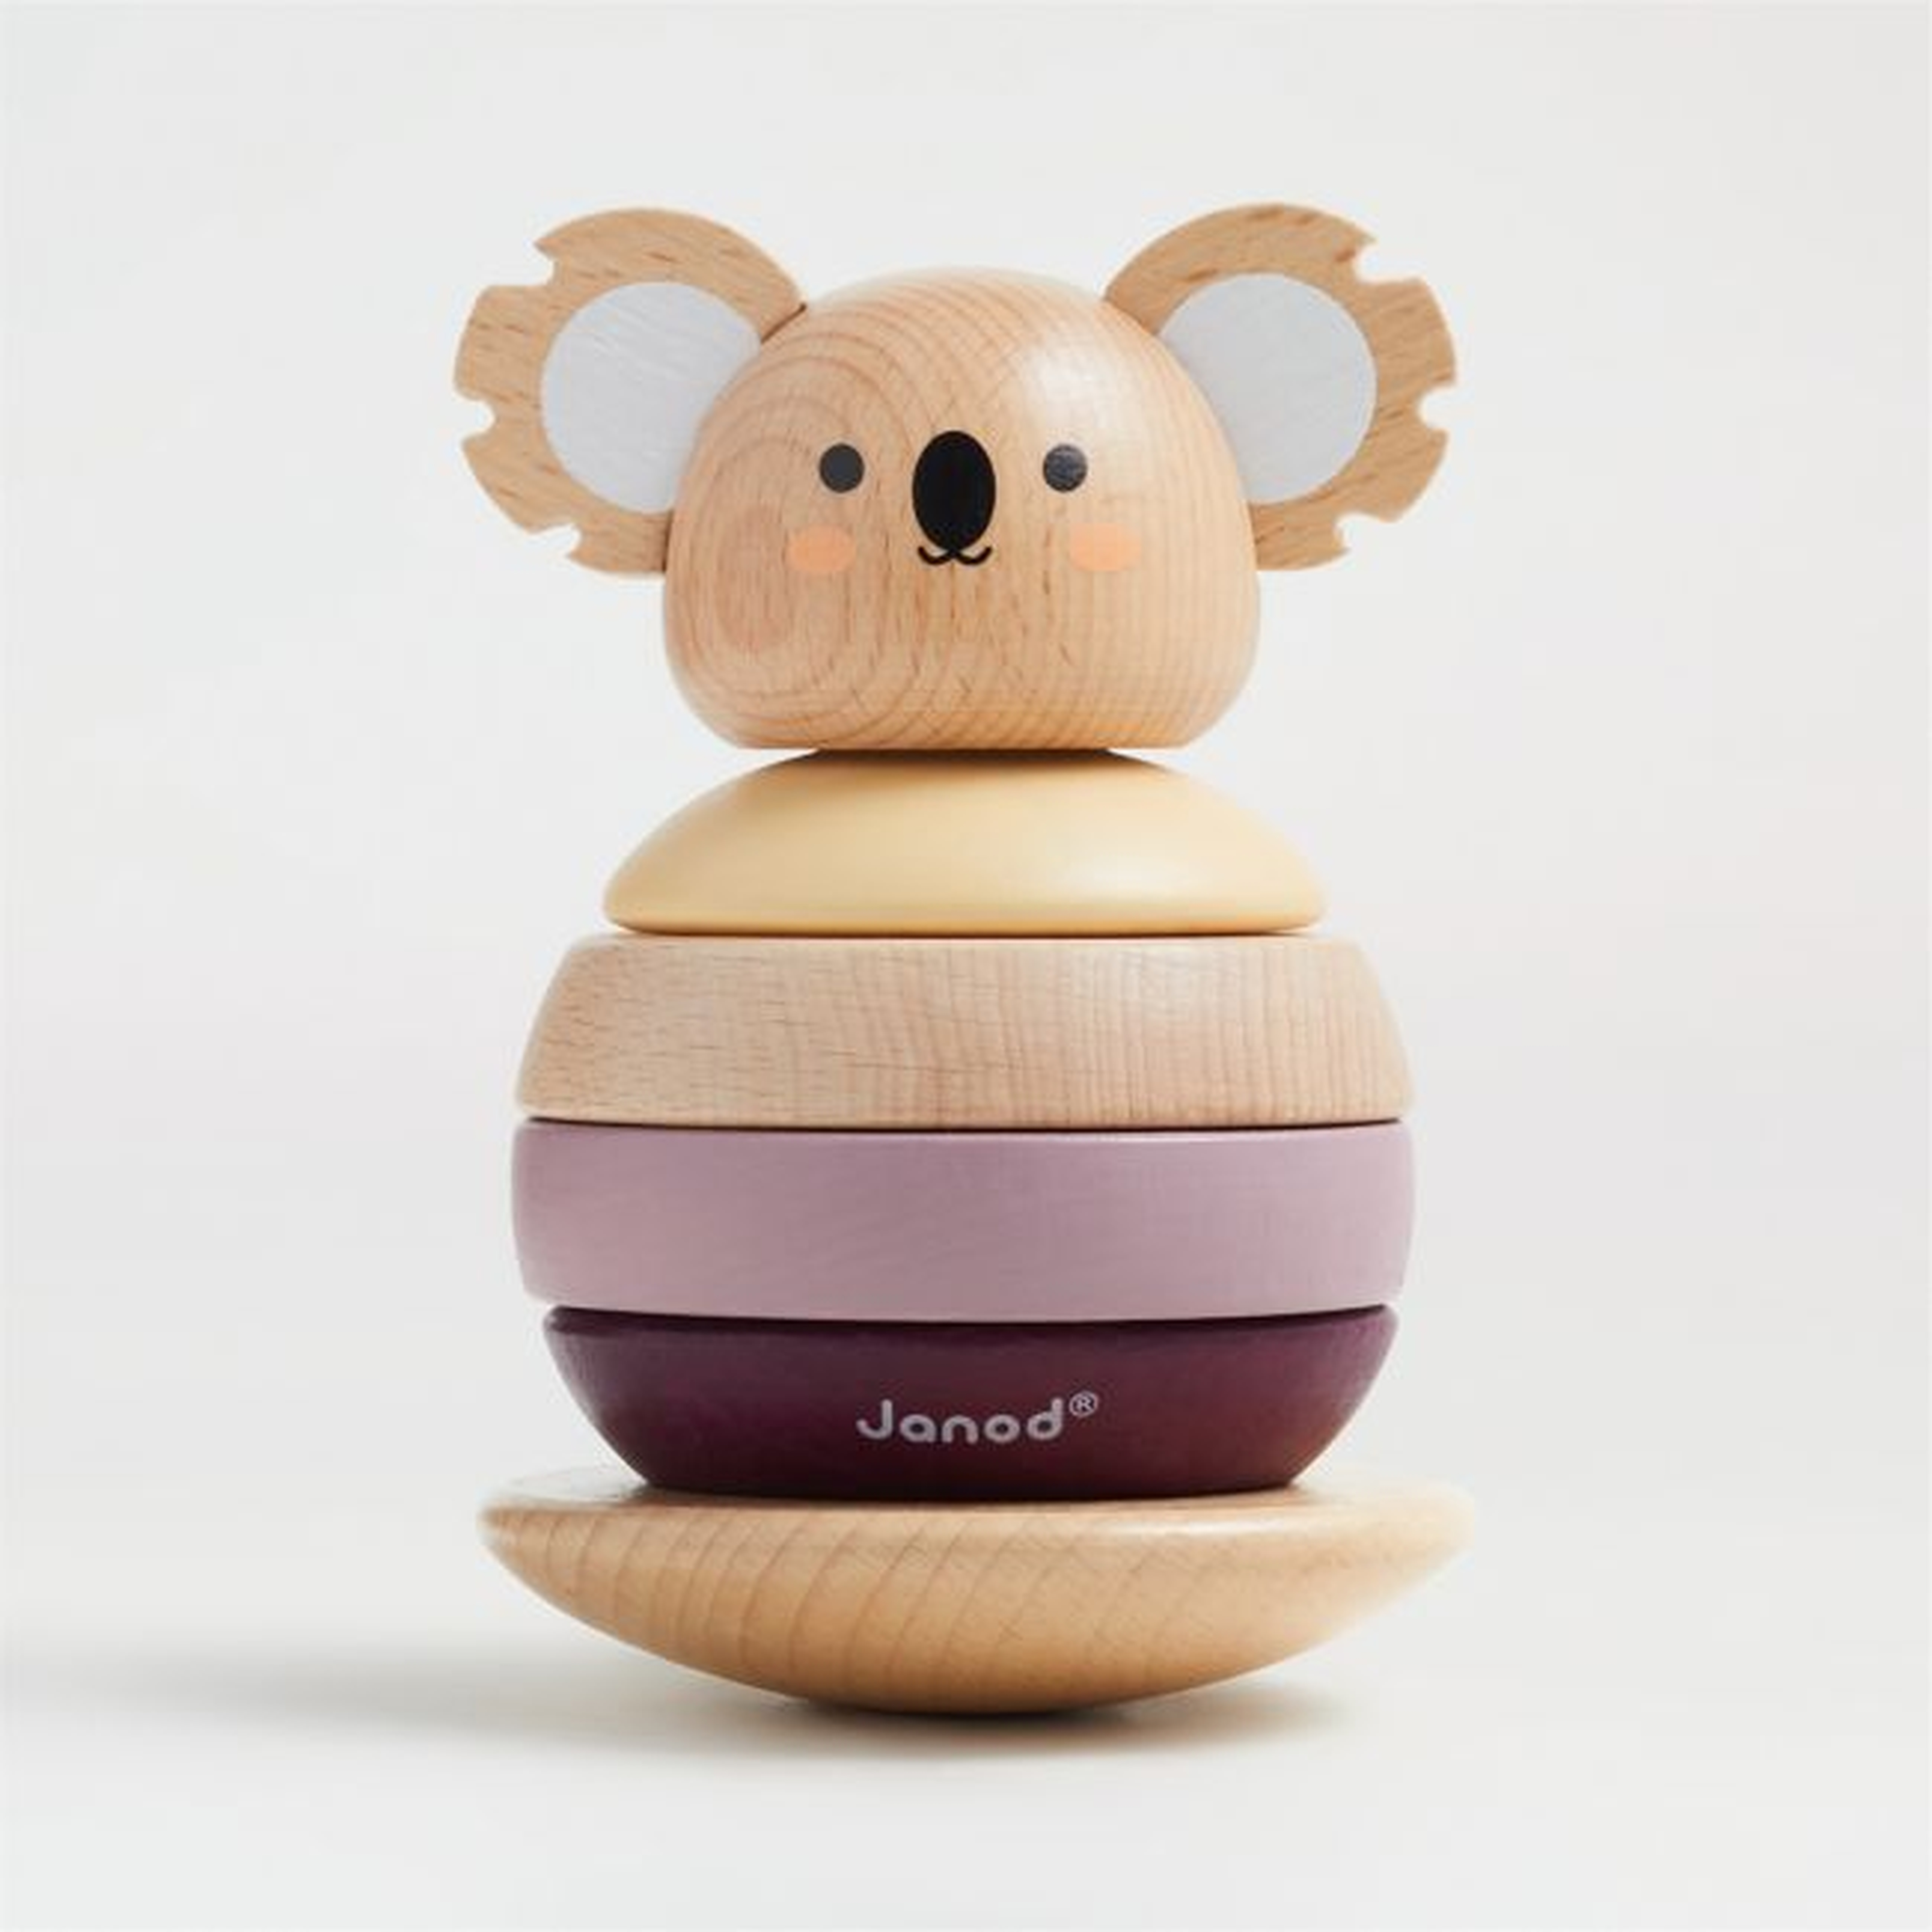 Janod Tumbling Koala Wooden Baby Toy - Crate and Barrel